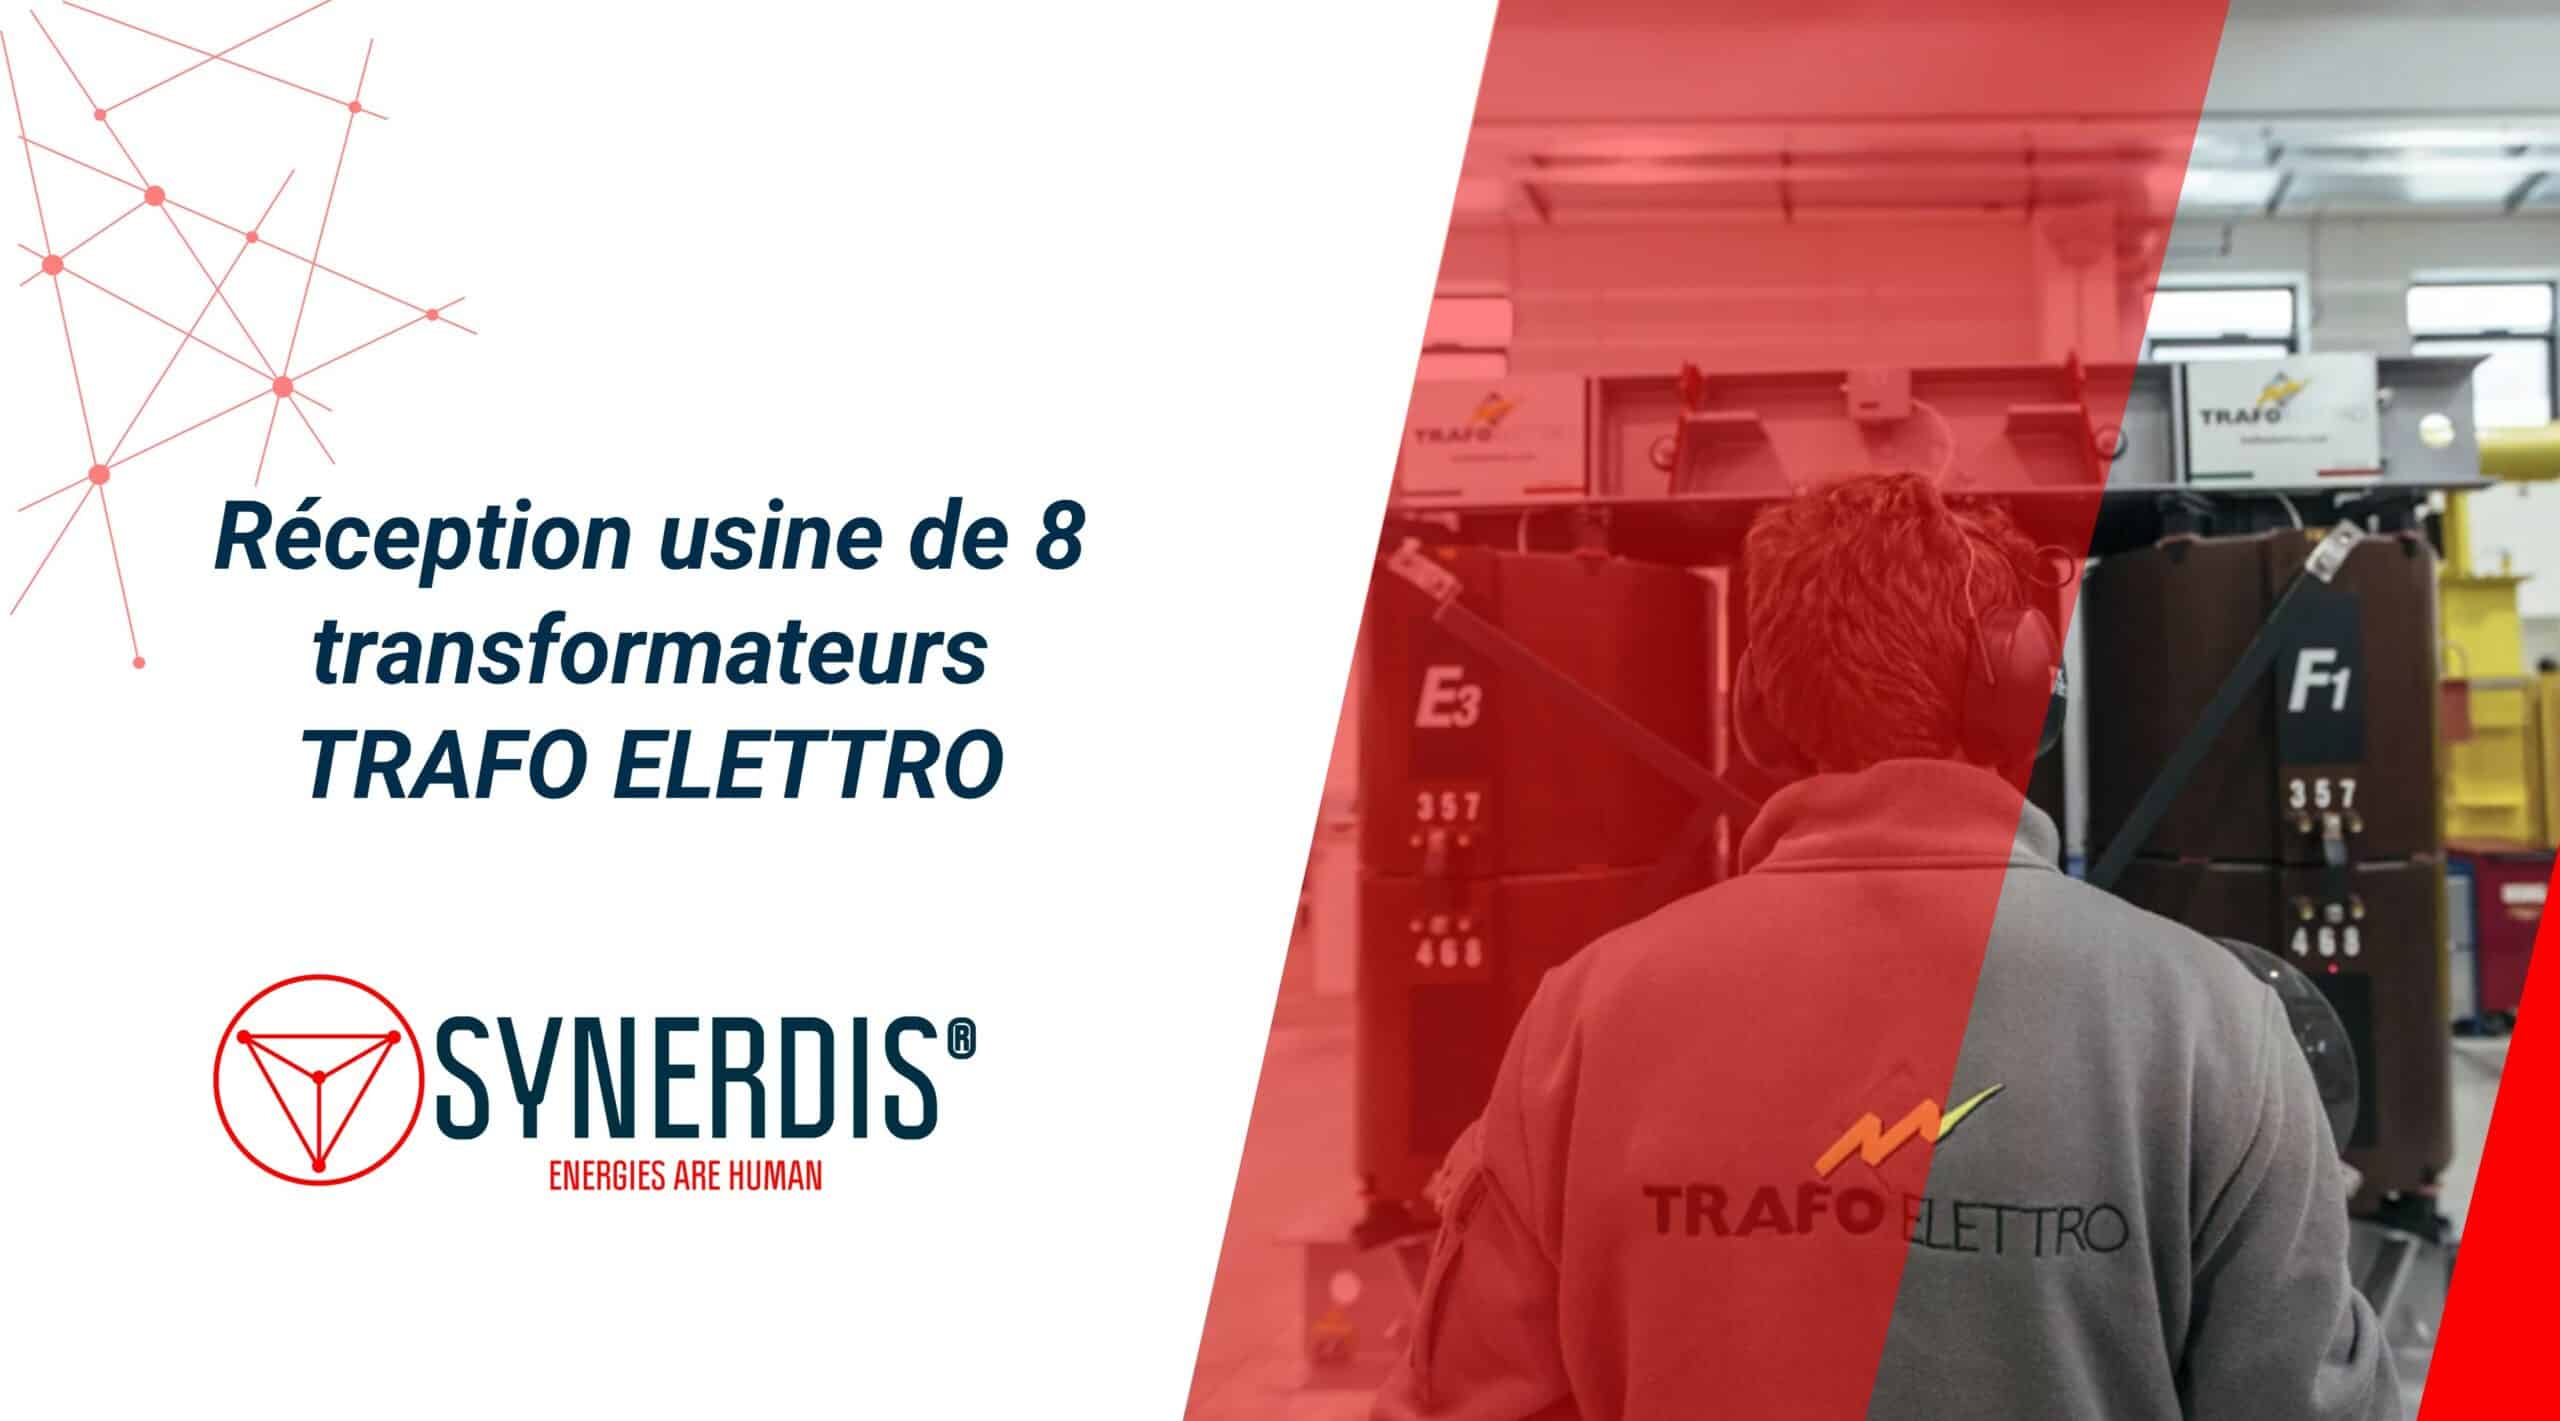 Synerdis project: factory acceptance of 8 Trafo ELETTRO transformers